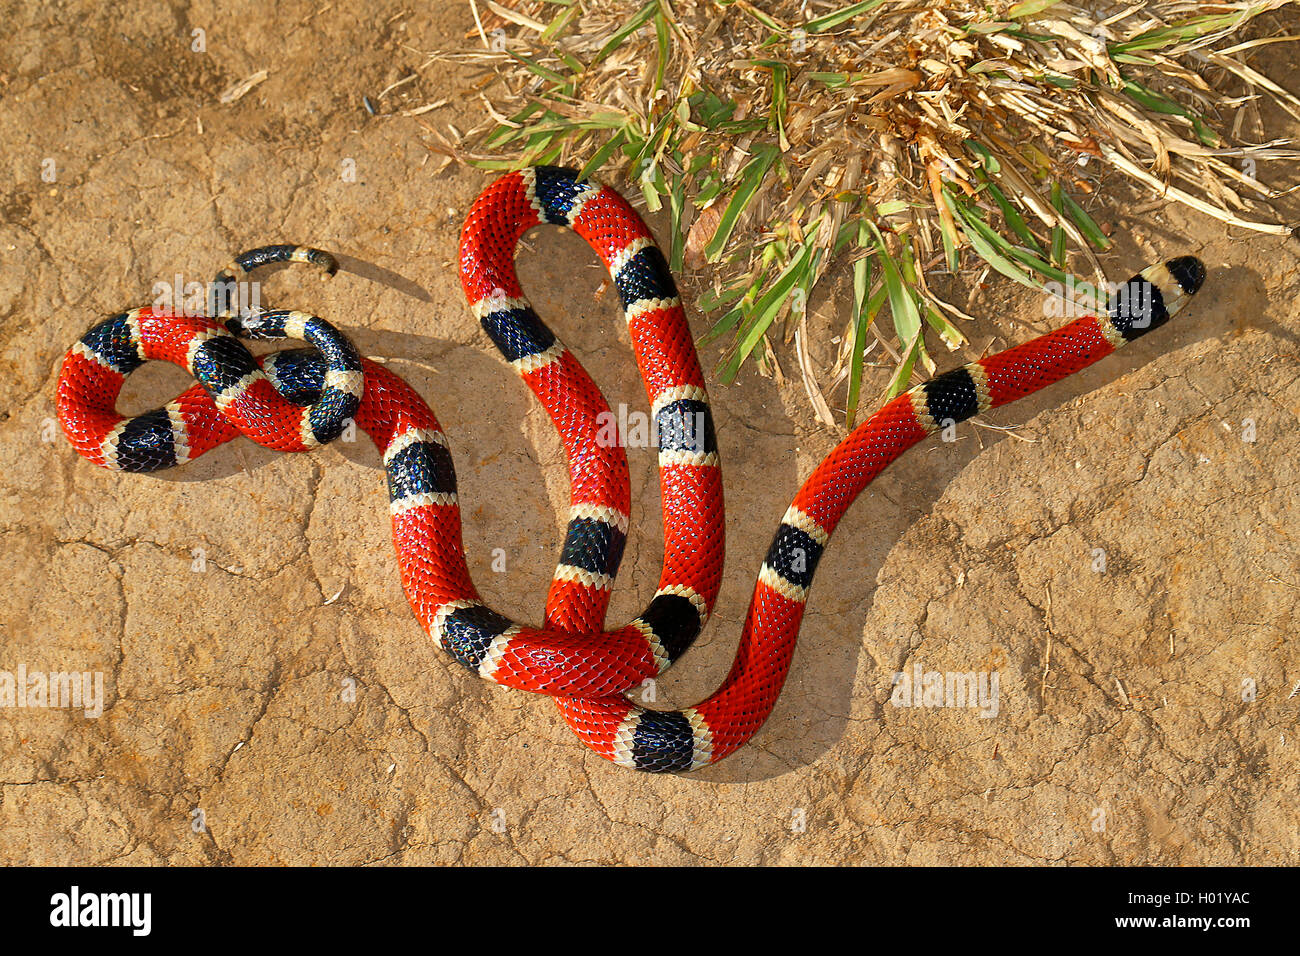 black-banded coral snake, Central American coral snake (Micrurus nigrocinctus), on the ground, Costa Rica Stock Photo